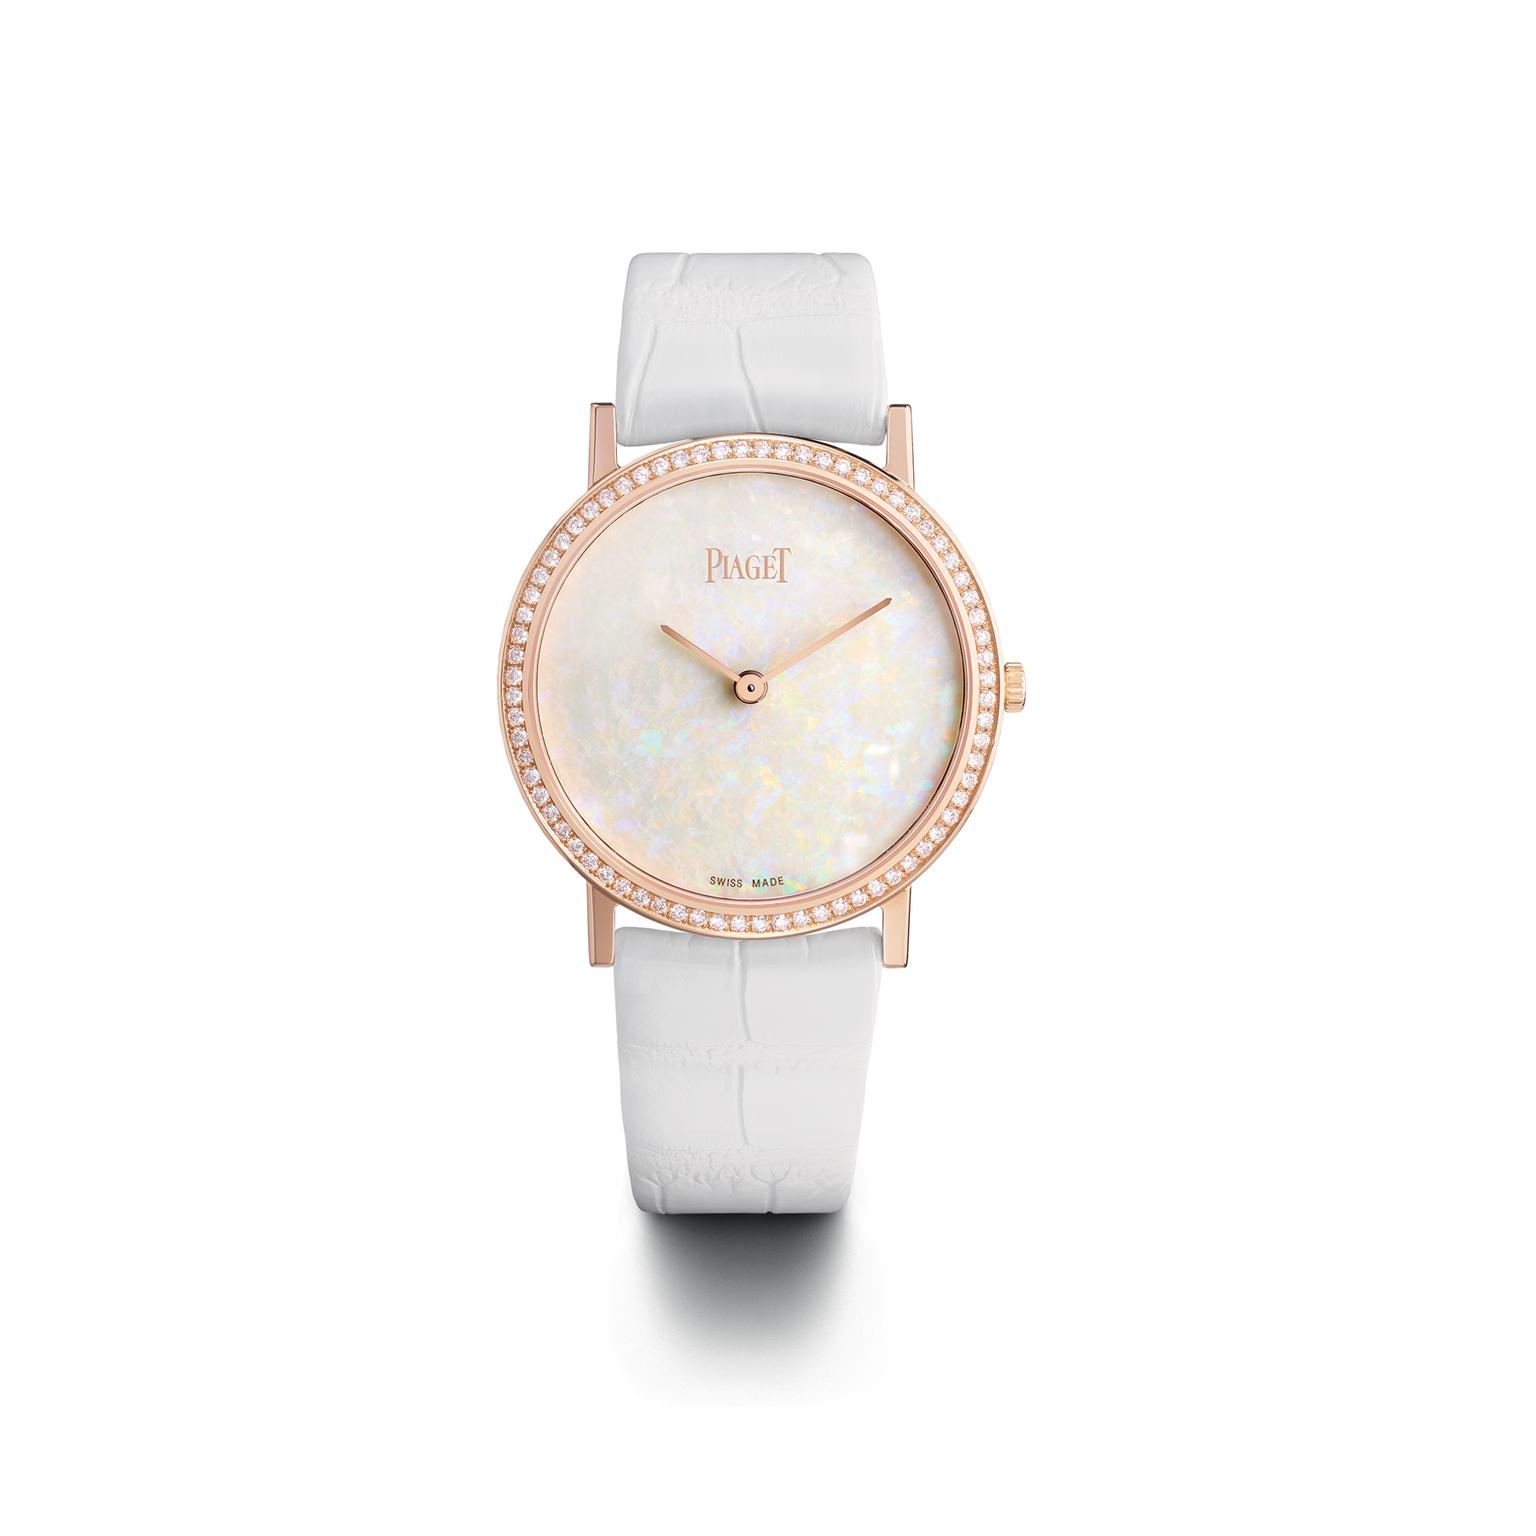 Piaget Altiplano in pink gold with white opal dial